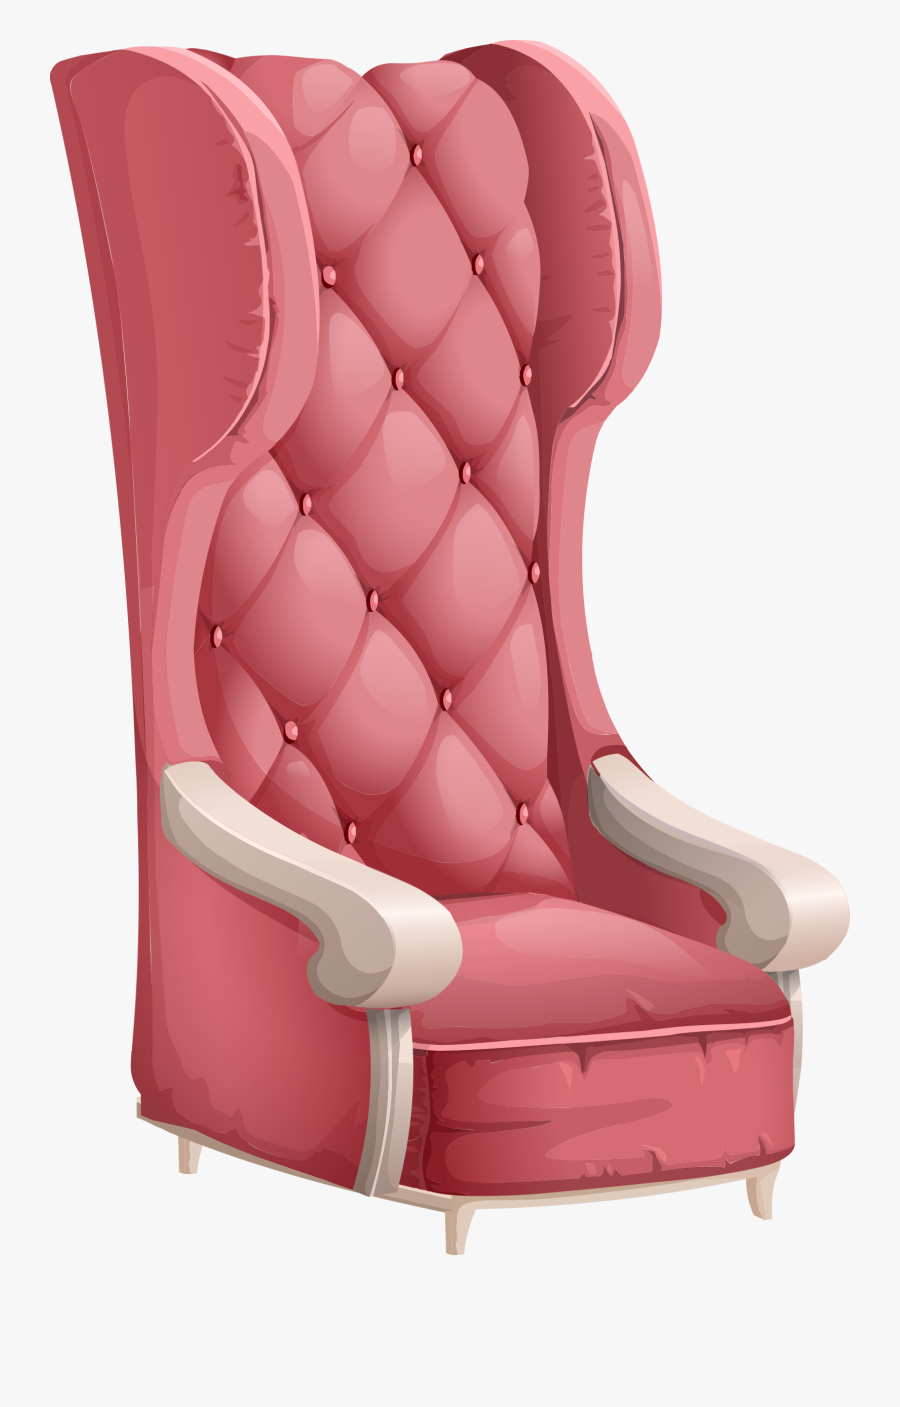 Pink,comfort,car Seat Cover - Fancy Chairs Png, Transparent Clipart